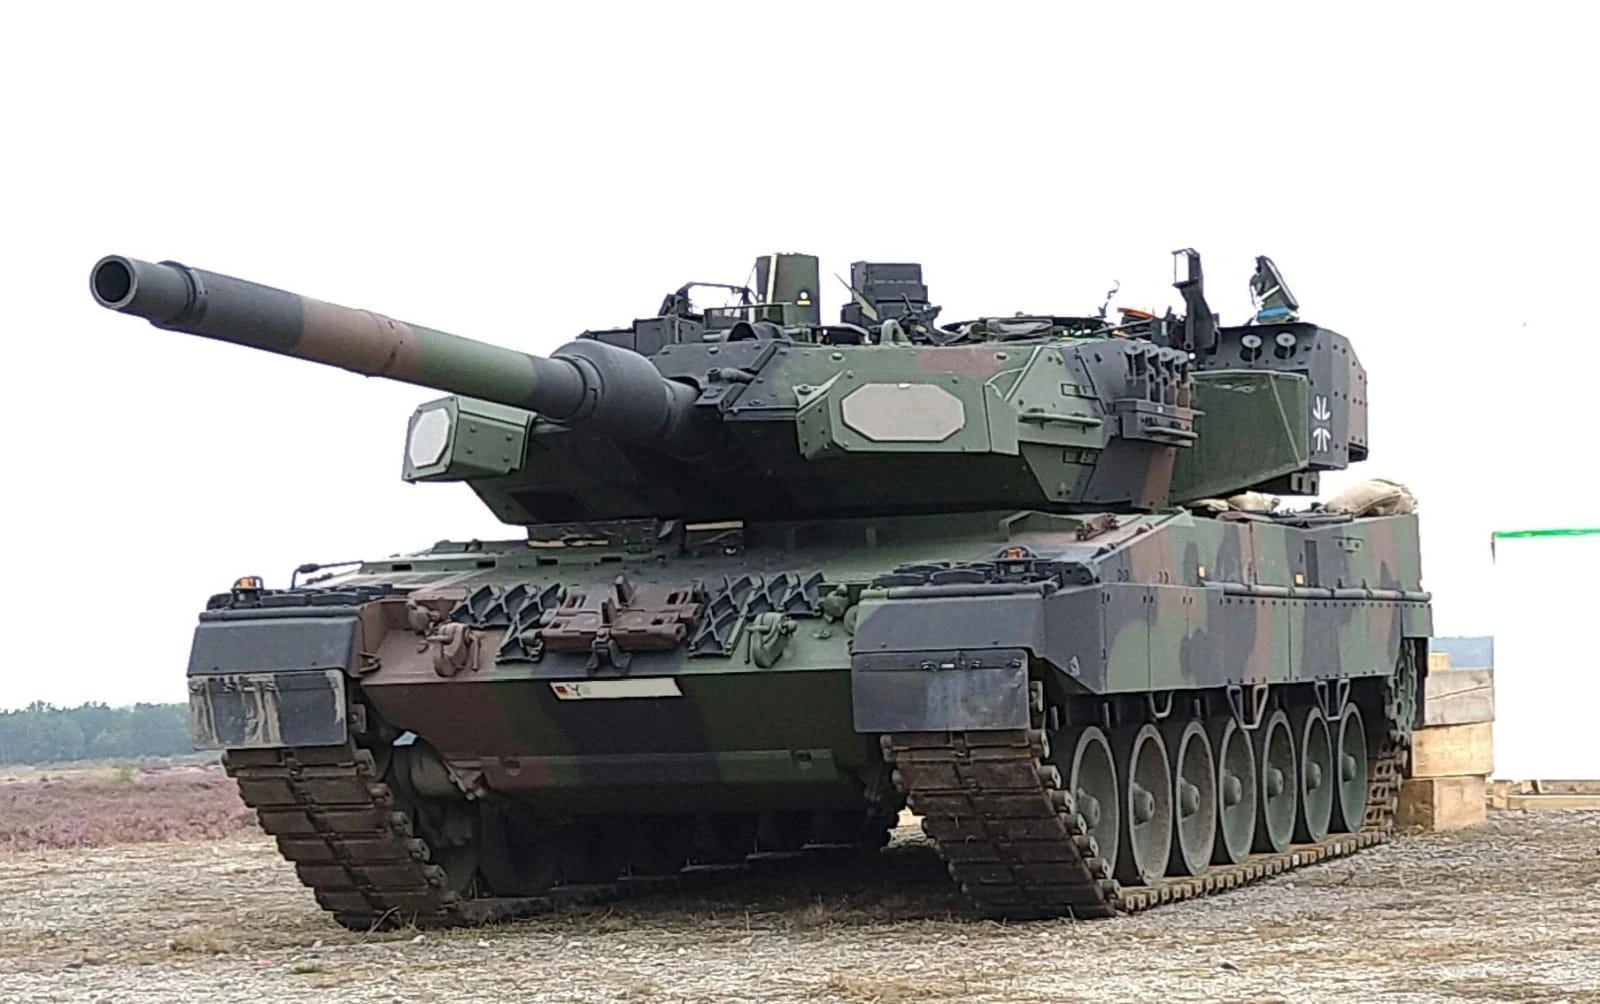 Rafael's TROPHY System demonstrated on the German LEOPARD 2 MBT